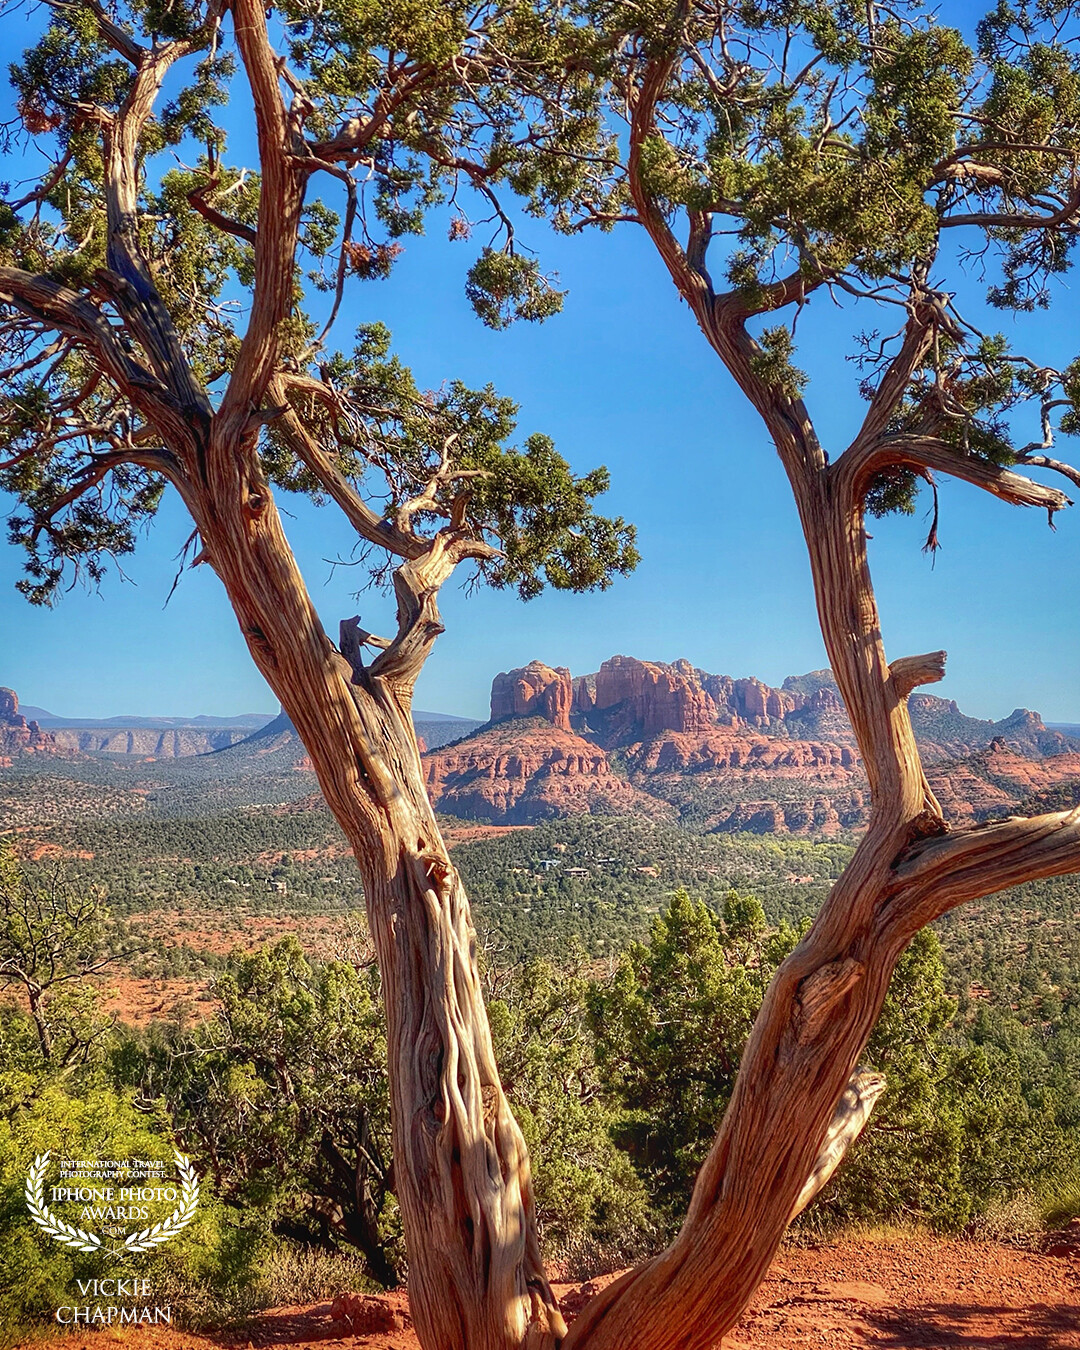 The red rocks of Sedona, AZ, the USA never ceases to take my breath away.